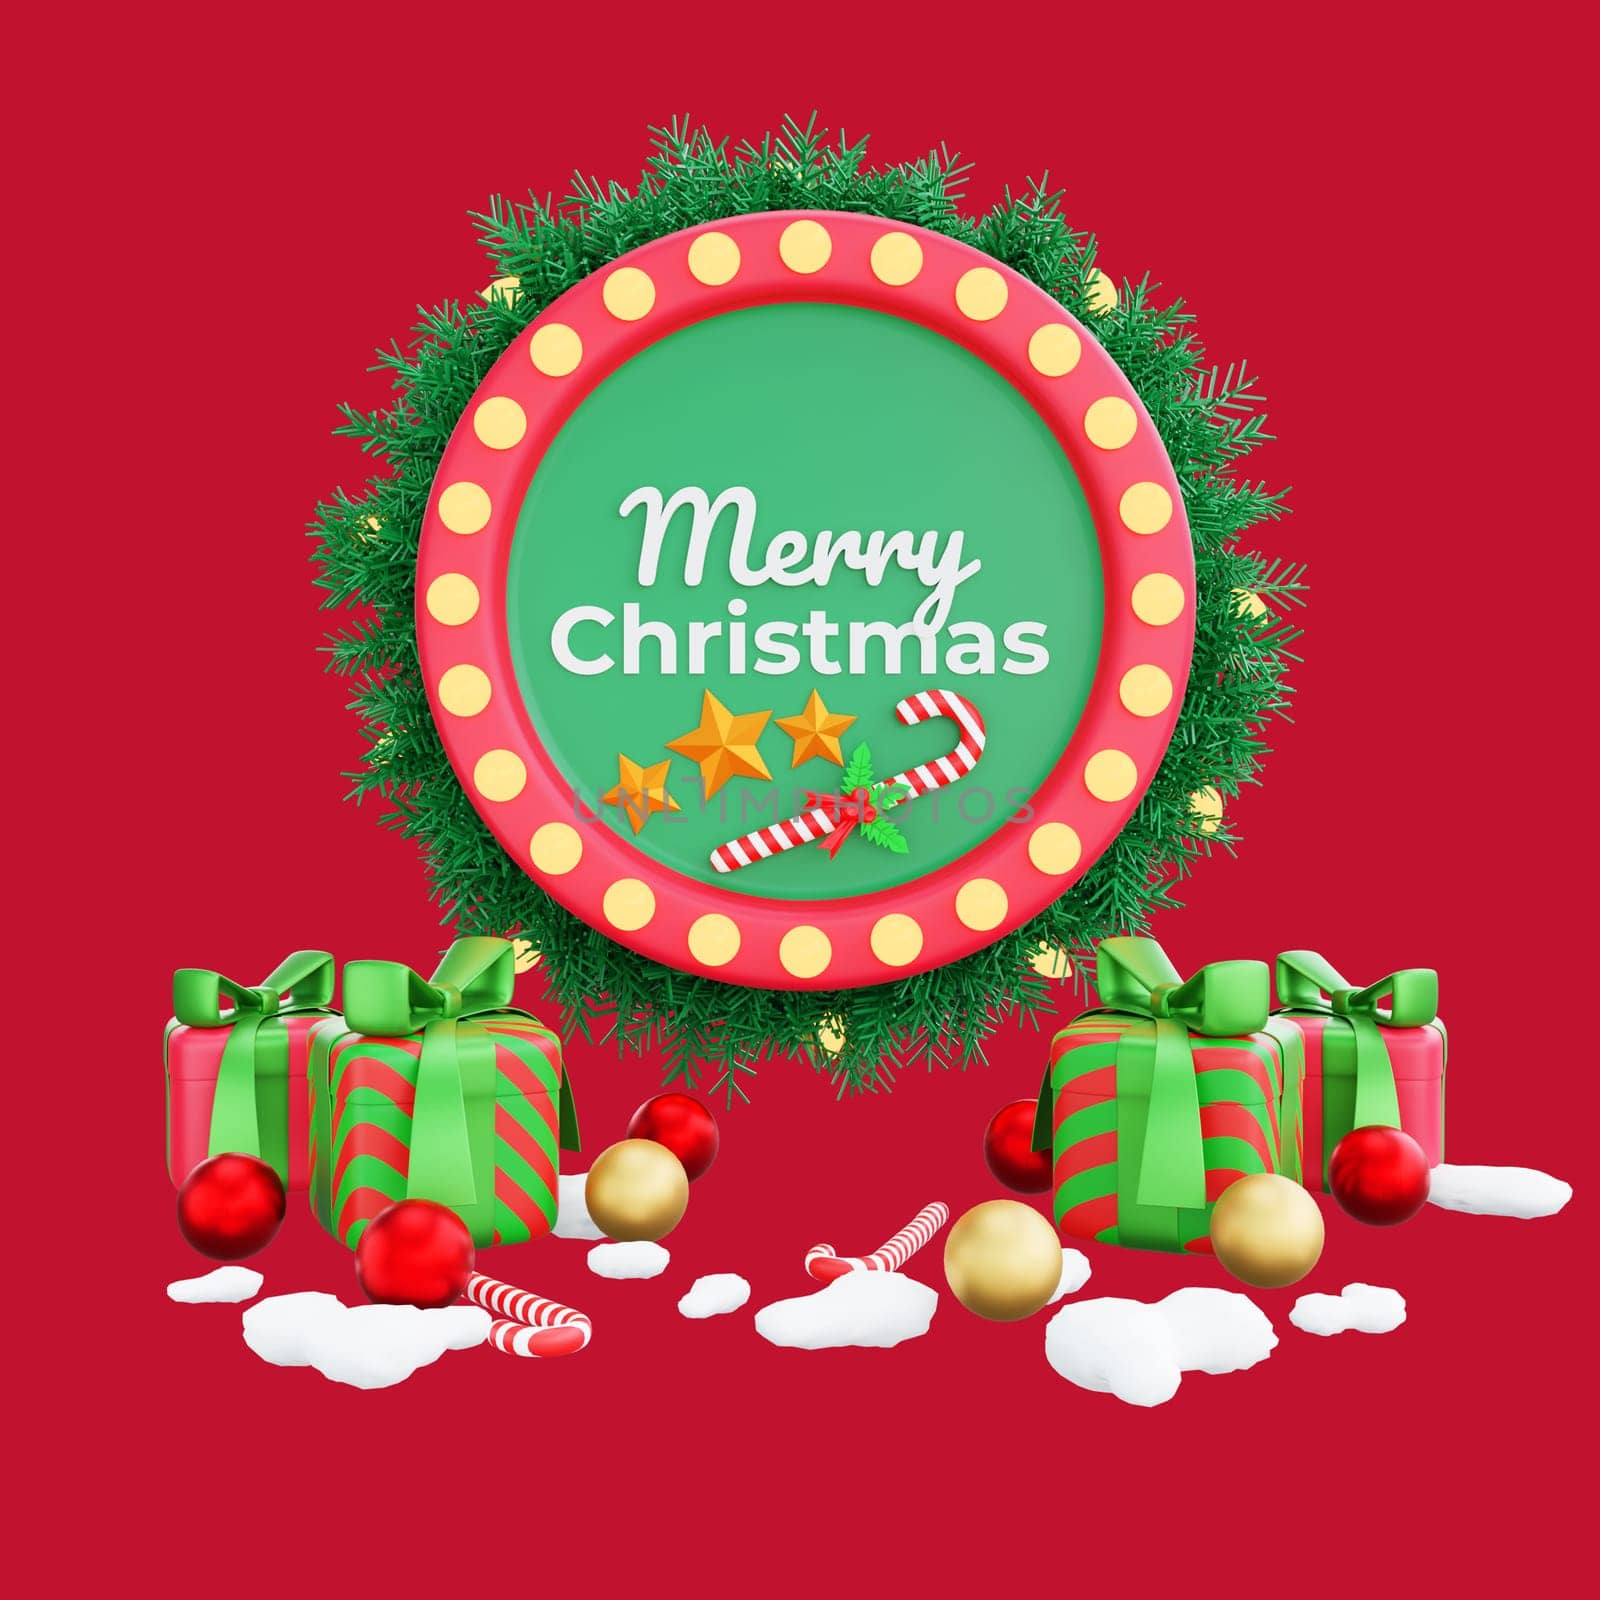 3D illustration of a festive Christmas wreath adorned with gifts and decorations, surrounded by gifts, candy canes, and snowflakes, with the message Merry Christmas. Perfect for Christmas and Happy New Year celebrations